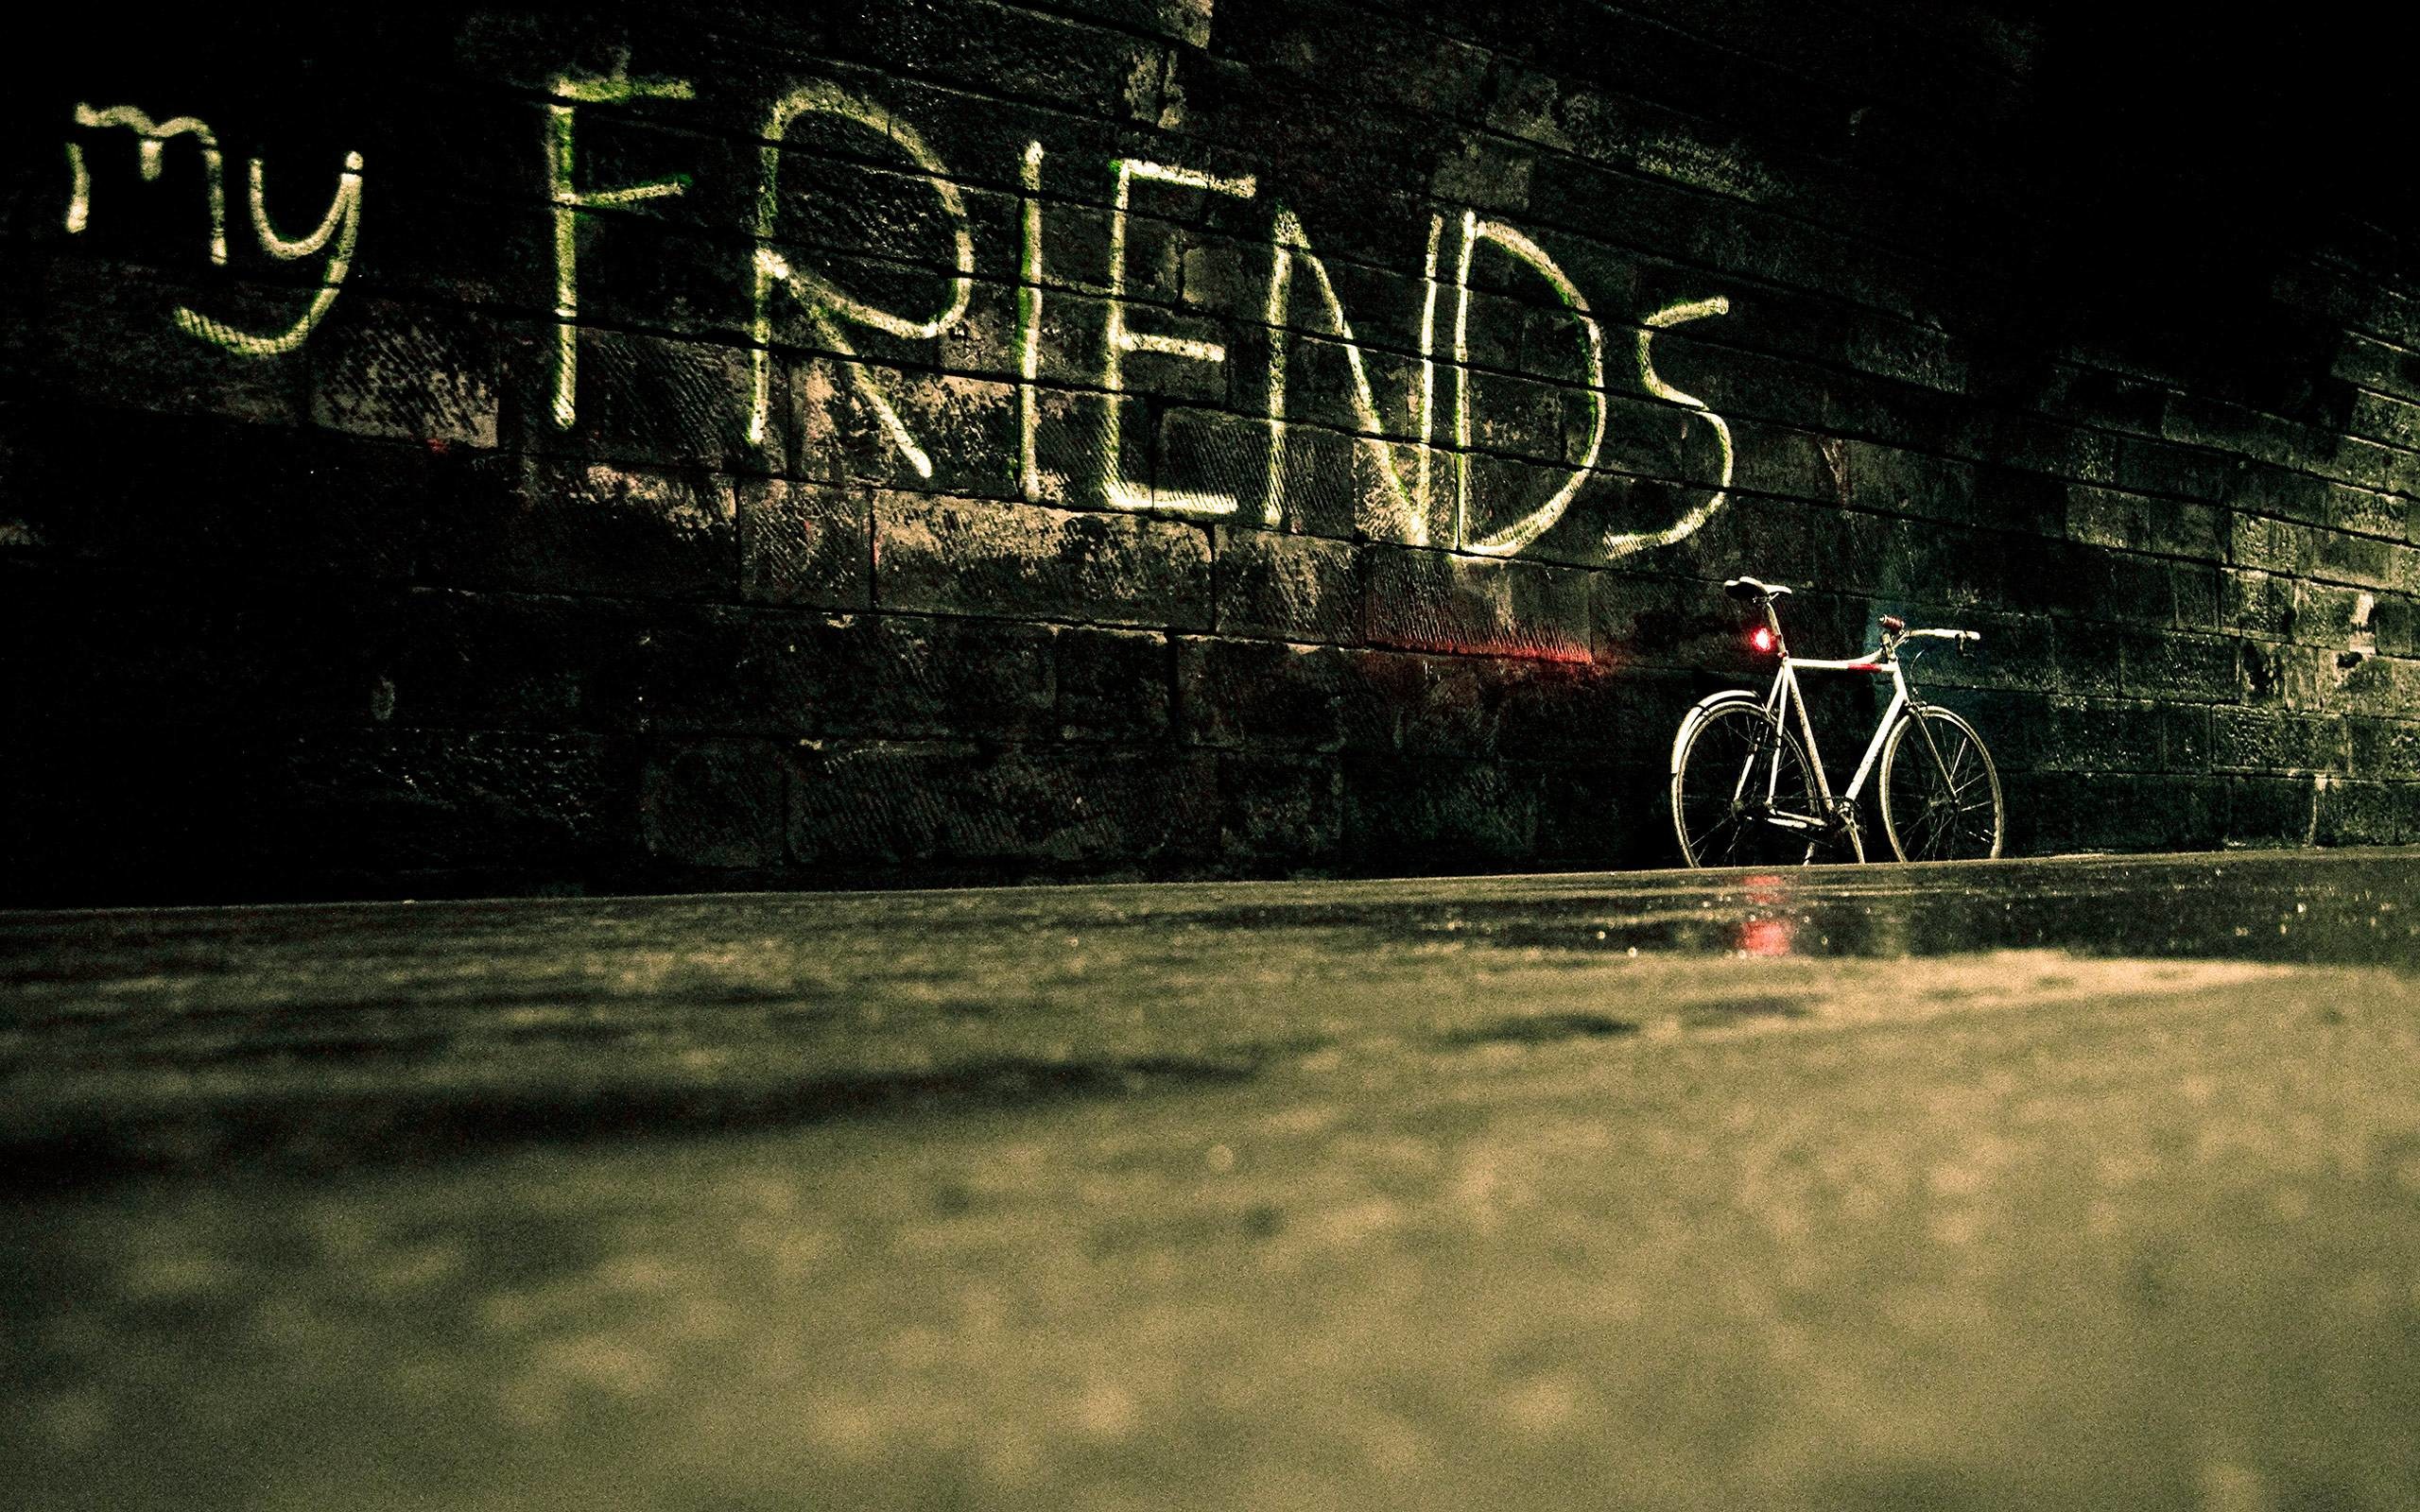 2560x1600 20+ Friendship Wallpapers